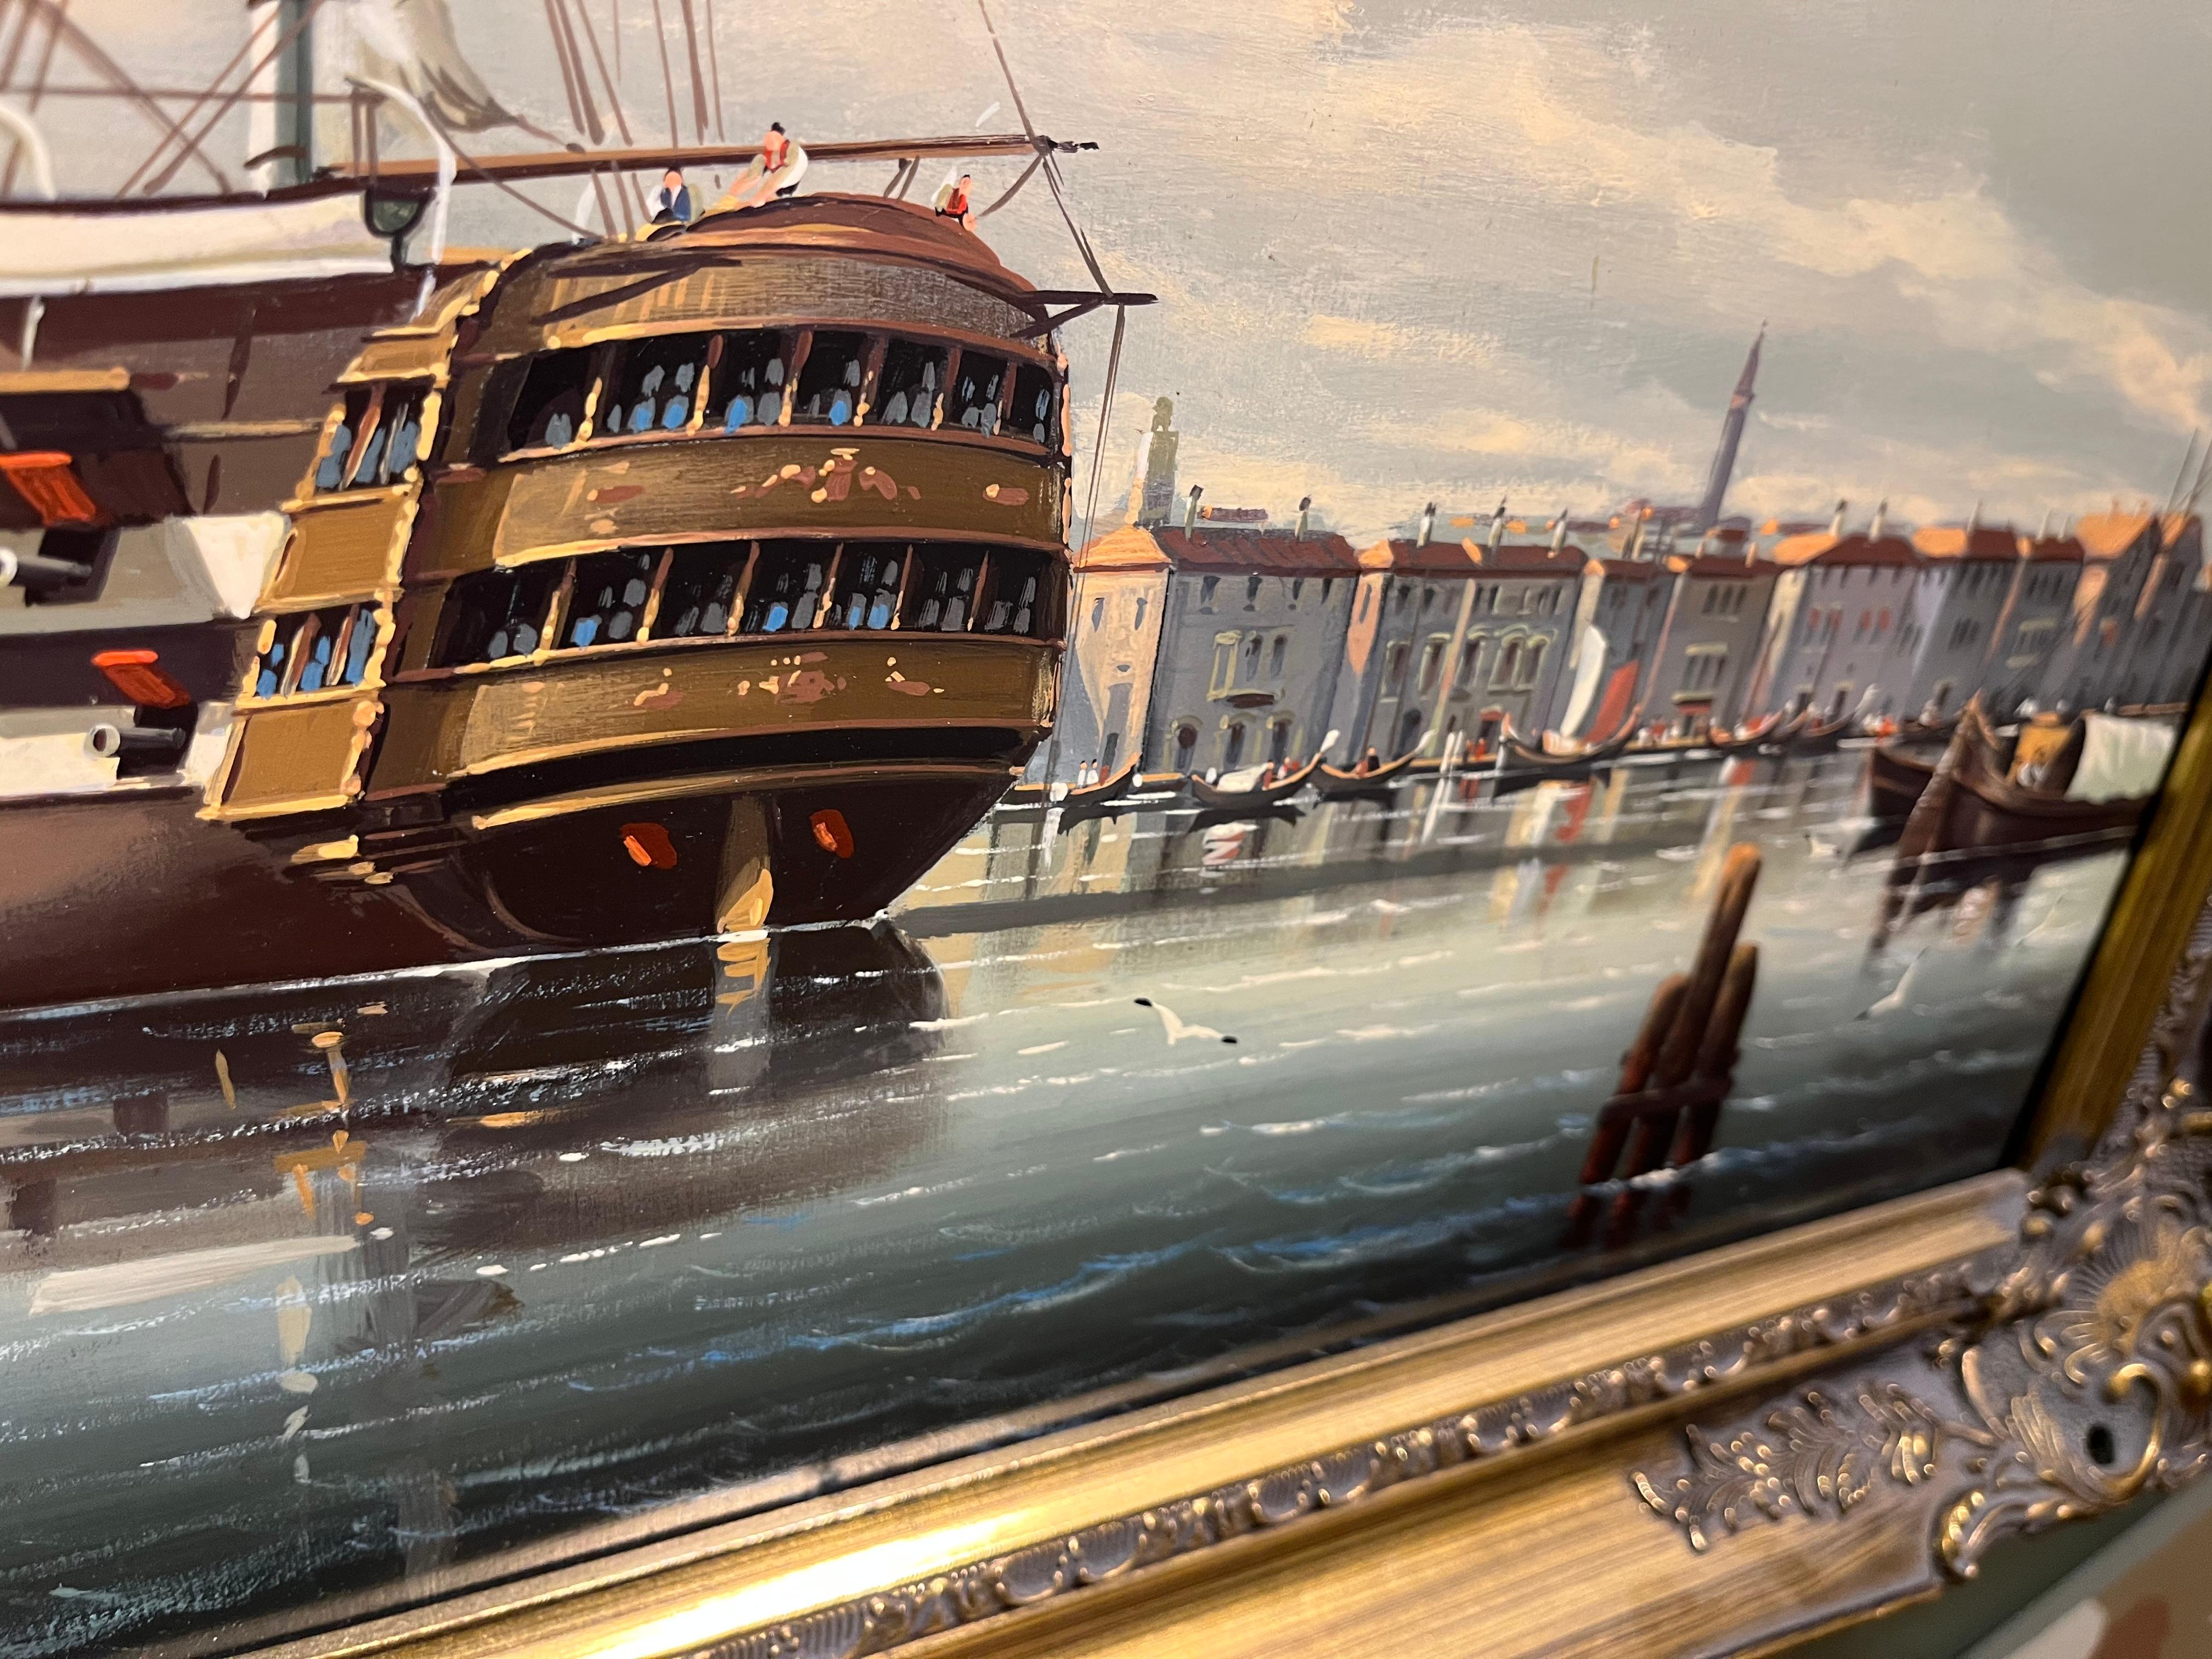 HUGE OIL PAINTING by SALVATORE COLACICCO (NAVY ADMIRALTY 20th CENTURY PIECE  - Realist Painting by Salvatore Colacicco